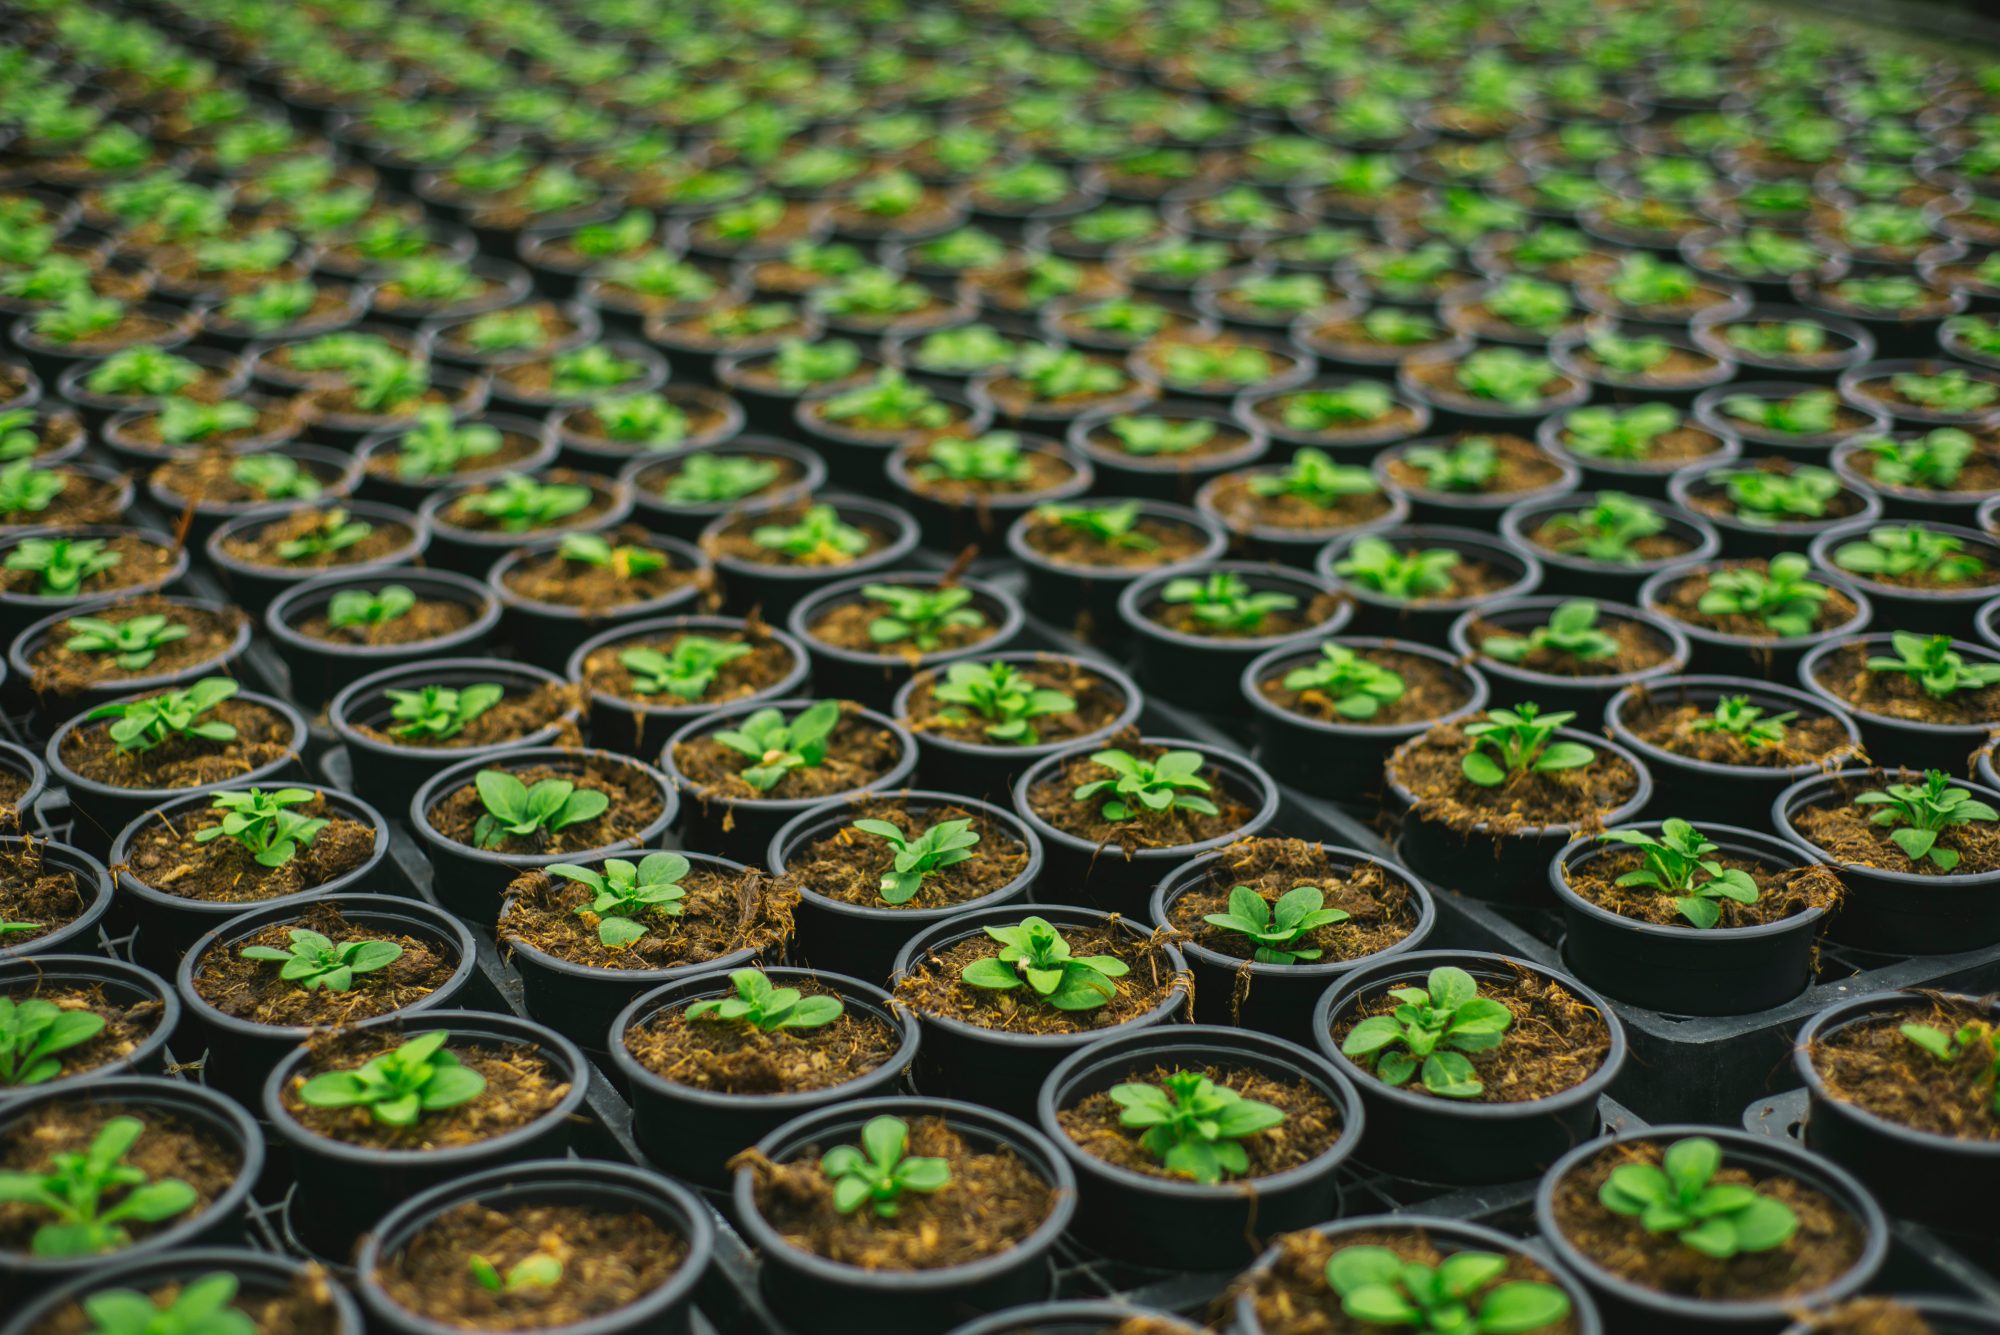 Rows of growing plants